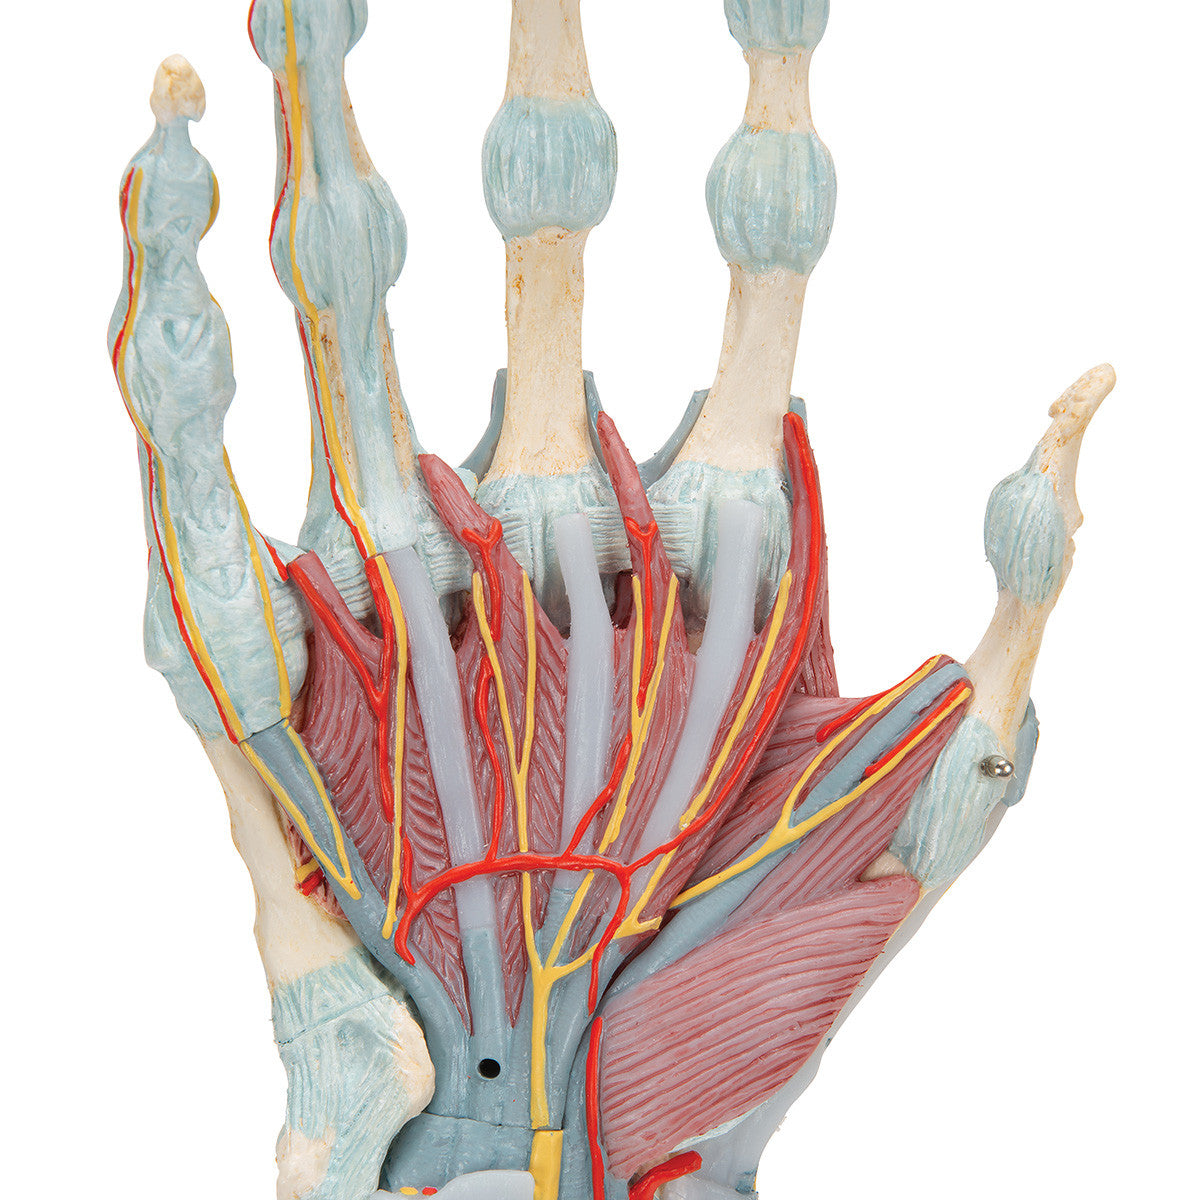 Hand Skeleton Model with Ligaments and Muscles - removed